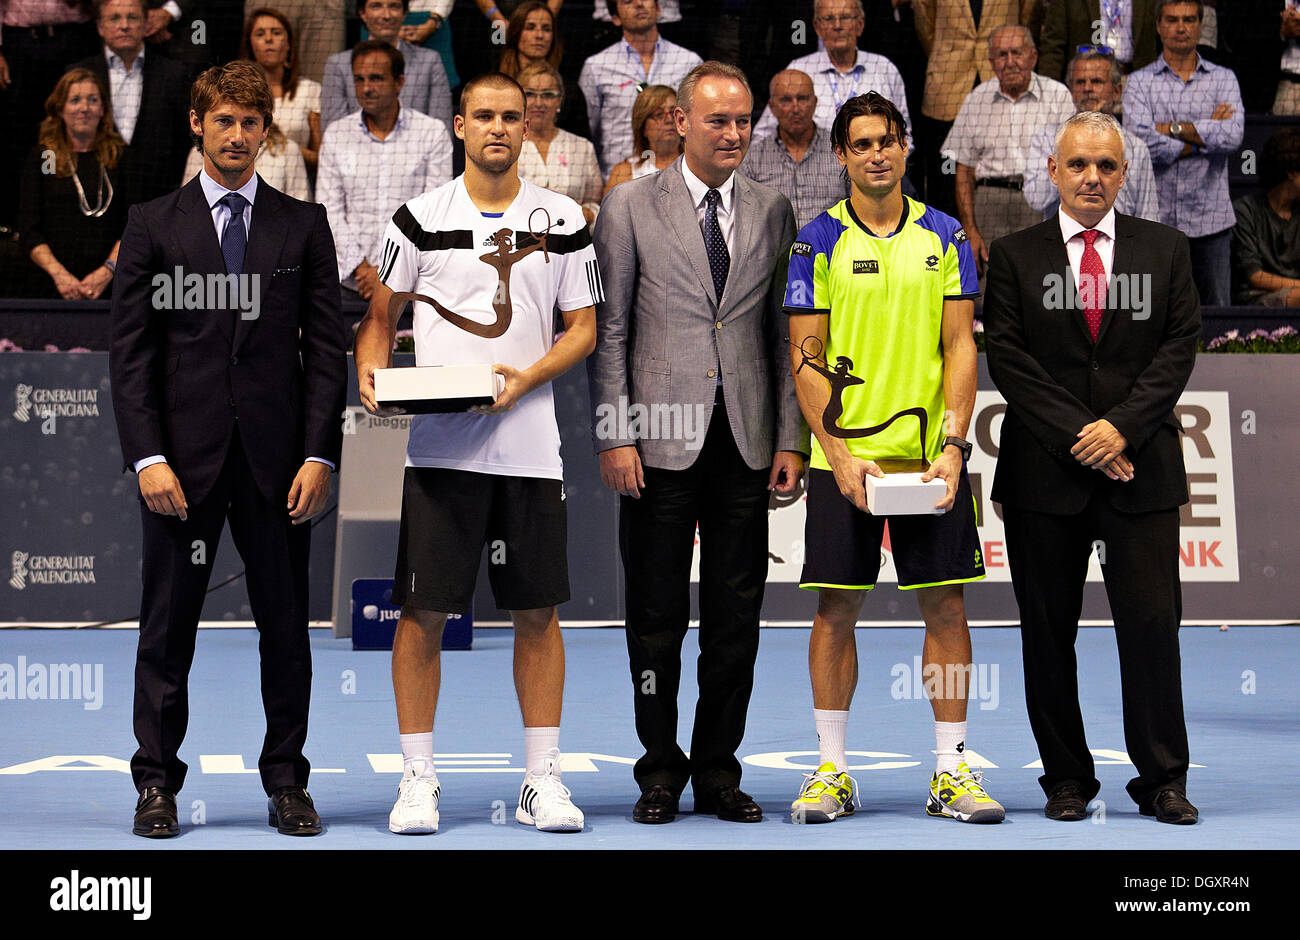 Valencia, Spain. 27th Oct, 2013. From L to R: Tournament director Juan Carlos Ferrero, winner Mikhail Youzhny of Rusia, President of Comunidad Valenciana Alberto Fabra, Up runner David Ferrer of Spain and RFET President of the Spanish Royal Federation of Tennis Jose Luis Esca&#xf1;uela pose at the awards ceremony of the the Valencia Open 500 Tennis Tournament at the Agora Building Credit:  Action Plus Sports/Alamy Live News Stock Photo